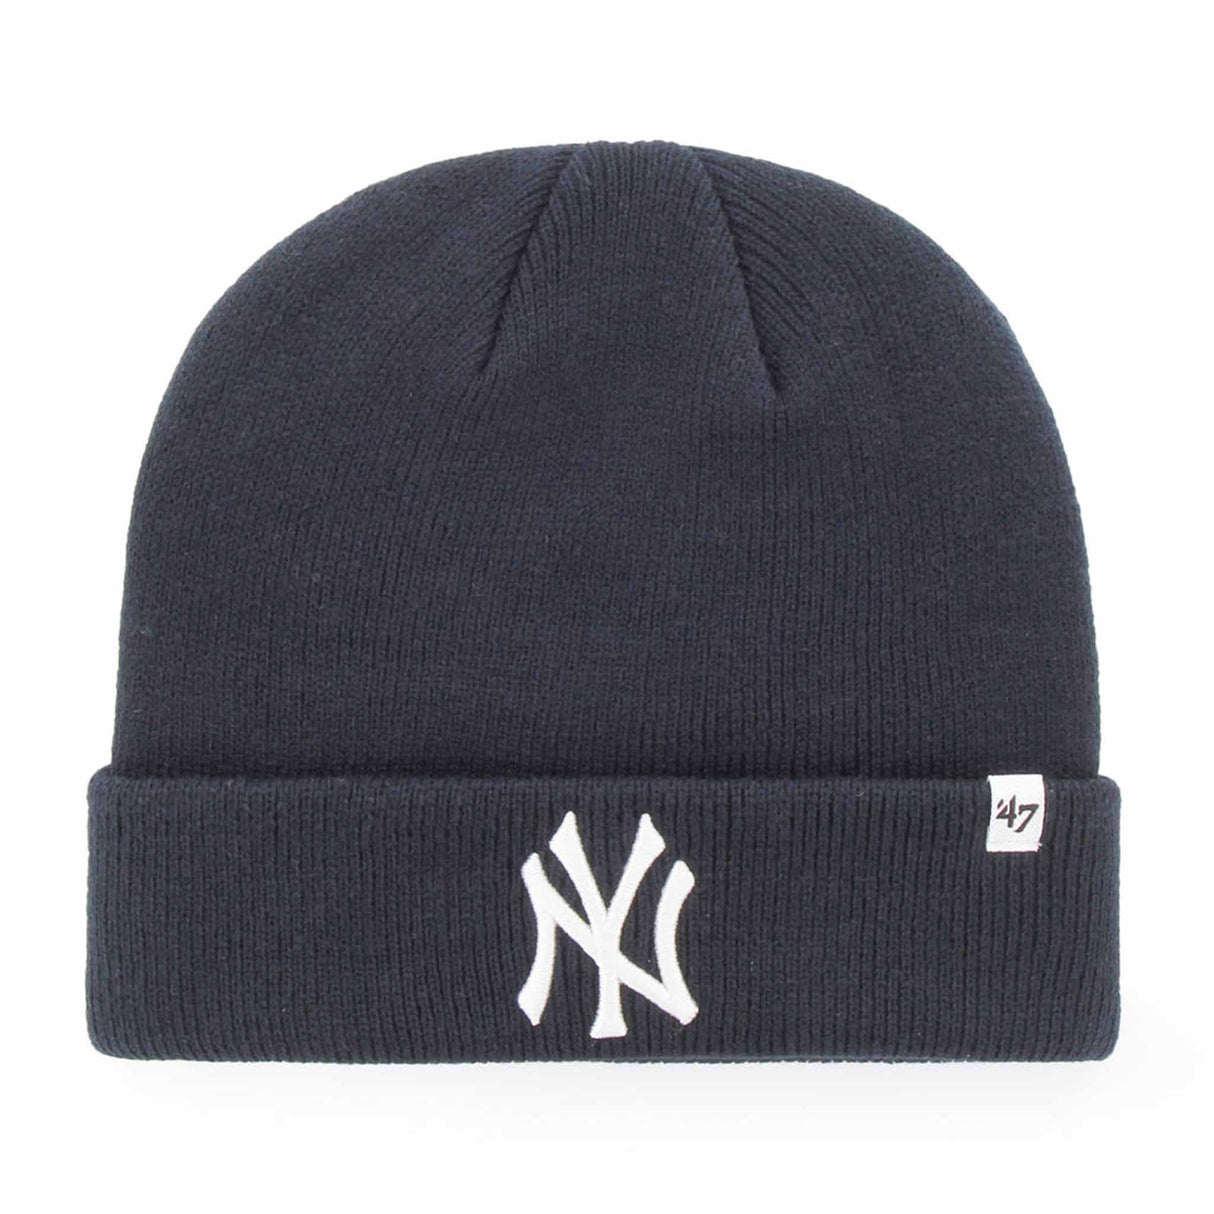 47 Brand Tuque a revers MLB New York Yankees